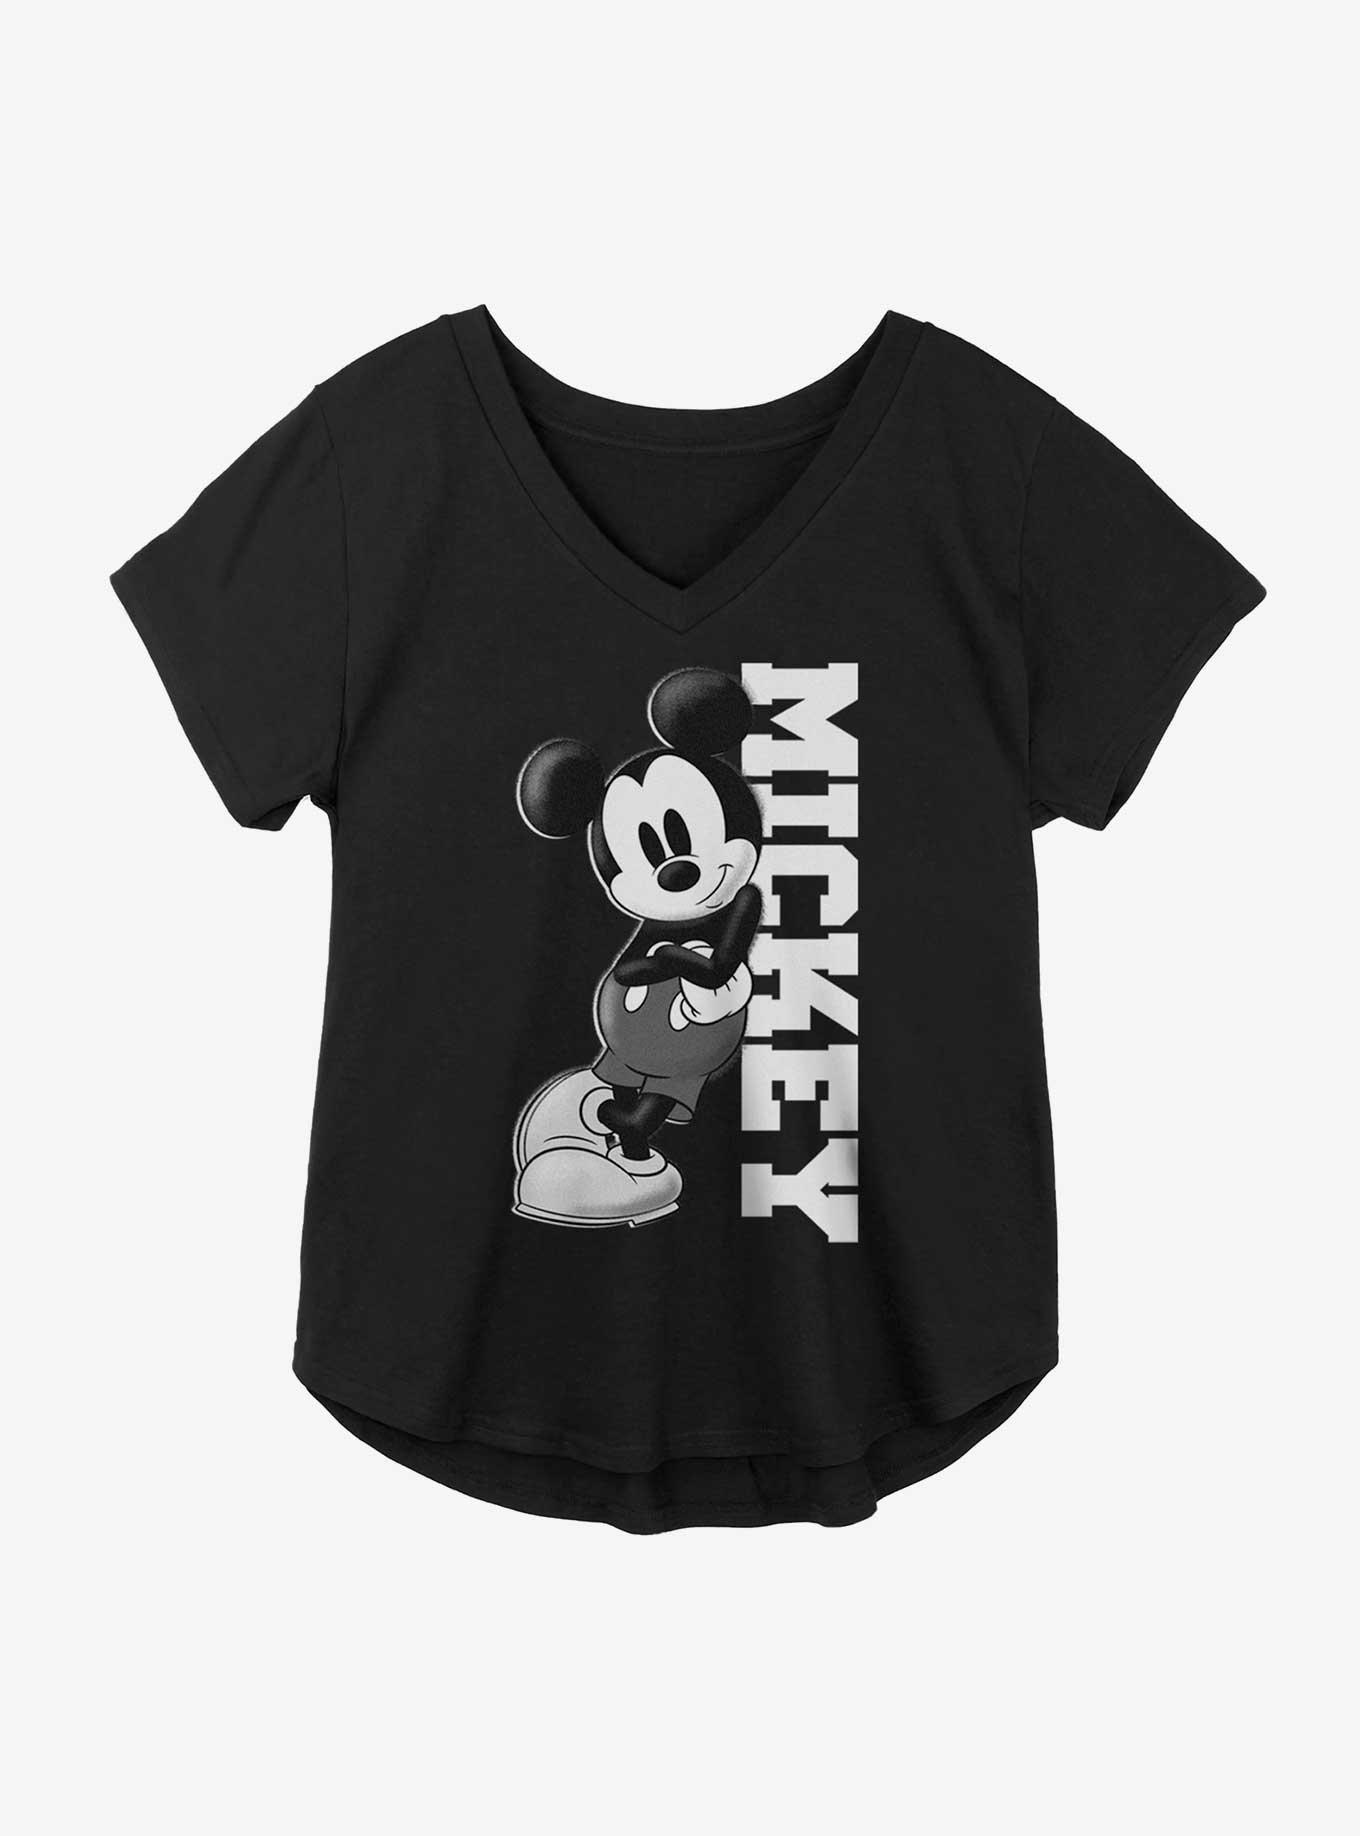 Disney Mickey Mouse Leaning Girls Plus Size T-Shirt, BLACK, hi-res